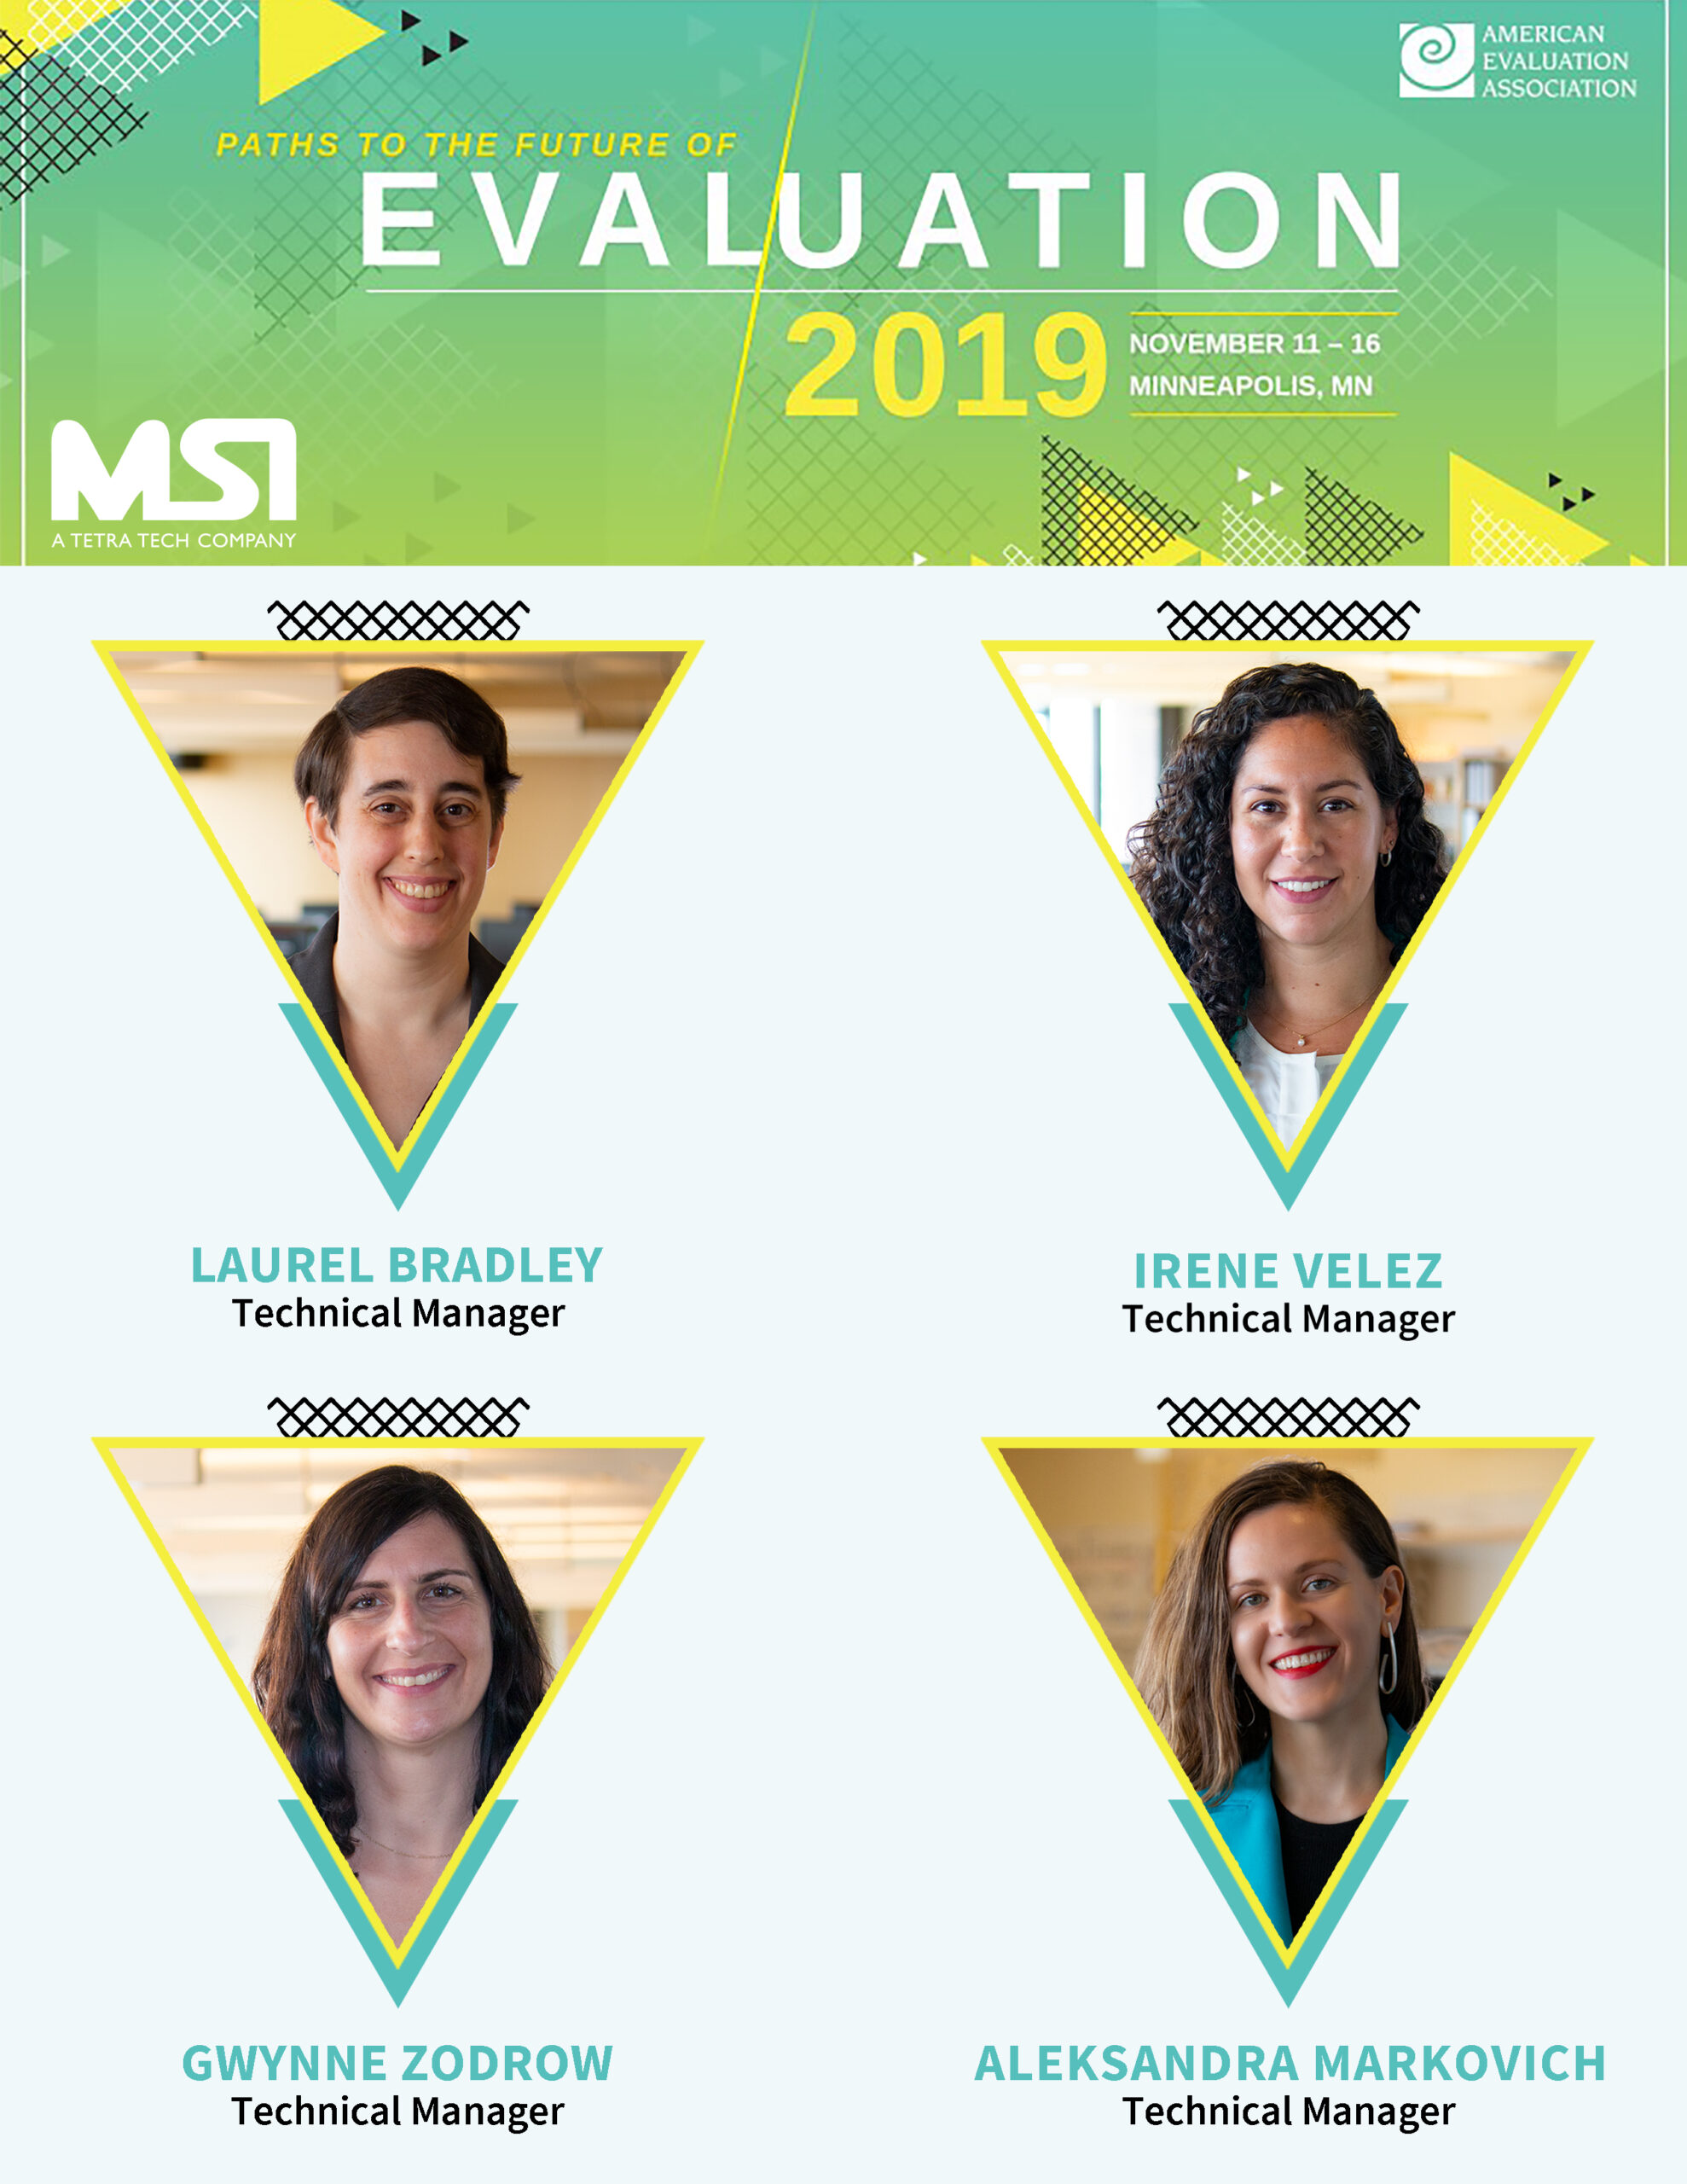 4 of MSI's technical experts attend AEA 2019